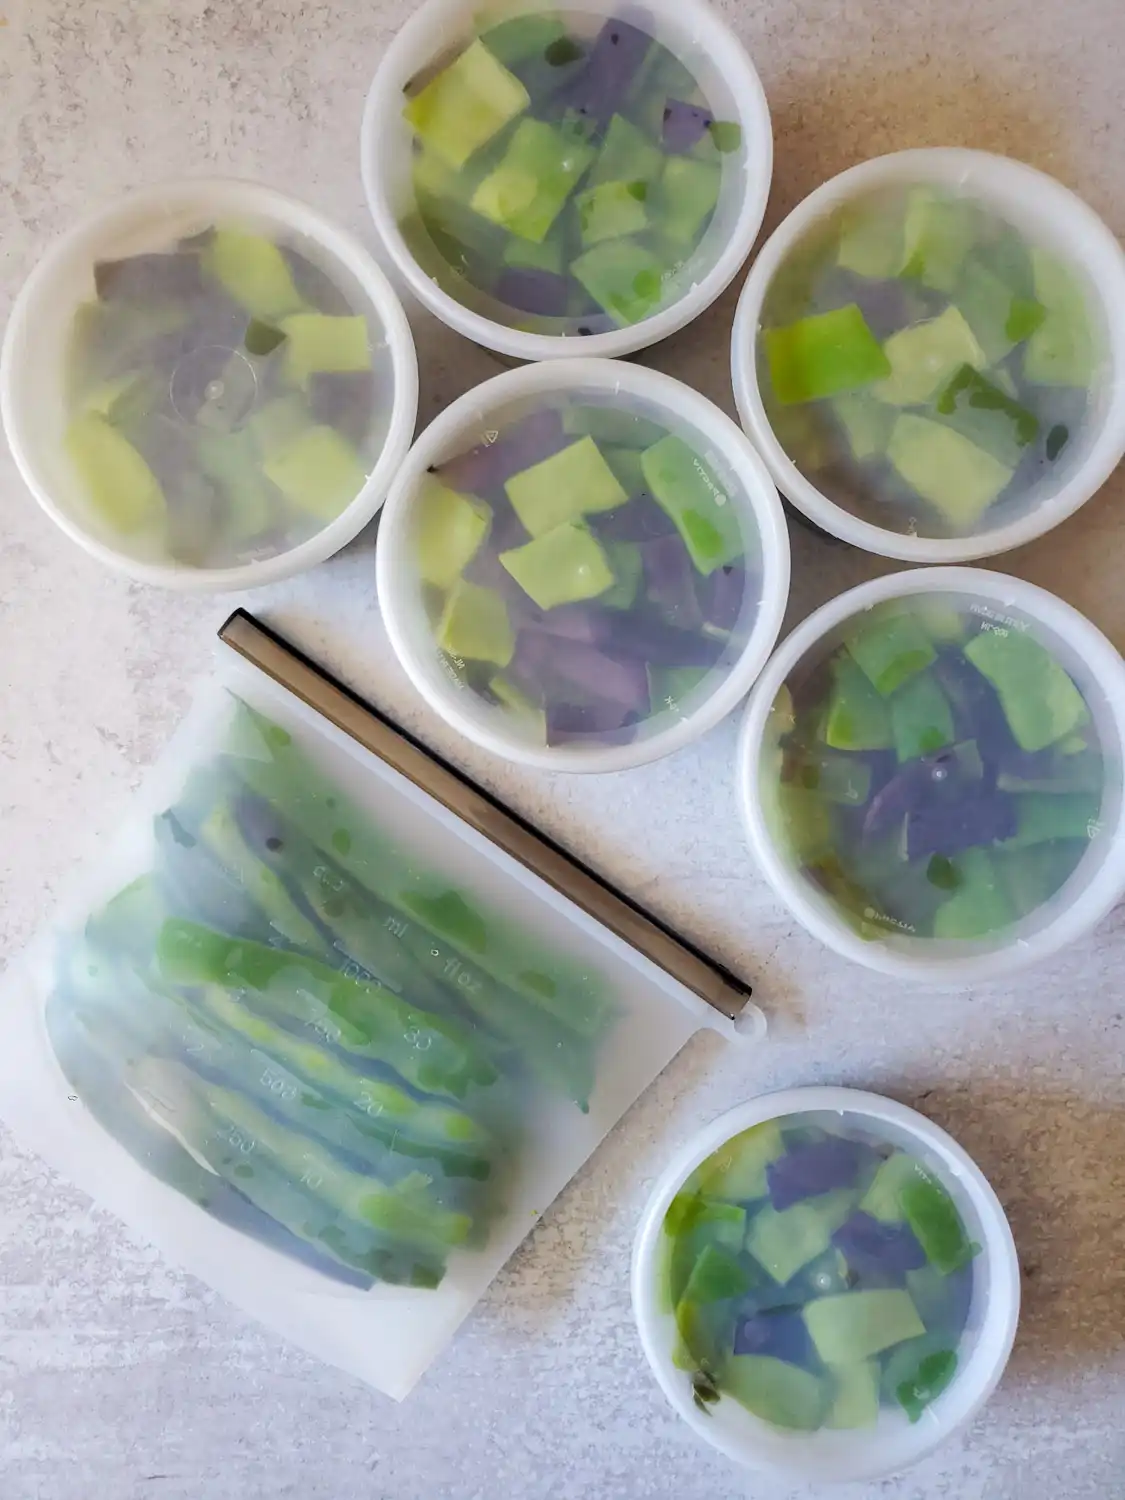 A flat lay image of 6 pints of blanched and cut green beans and one reusable silicone bag full of blanched and whole green beans. A variety of green and purple are showing through the containers from the colorful beans. 